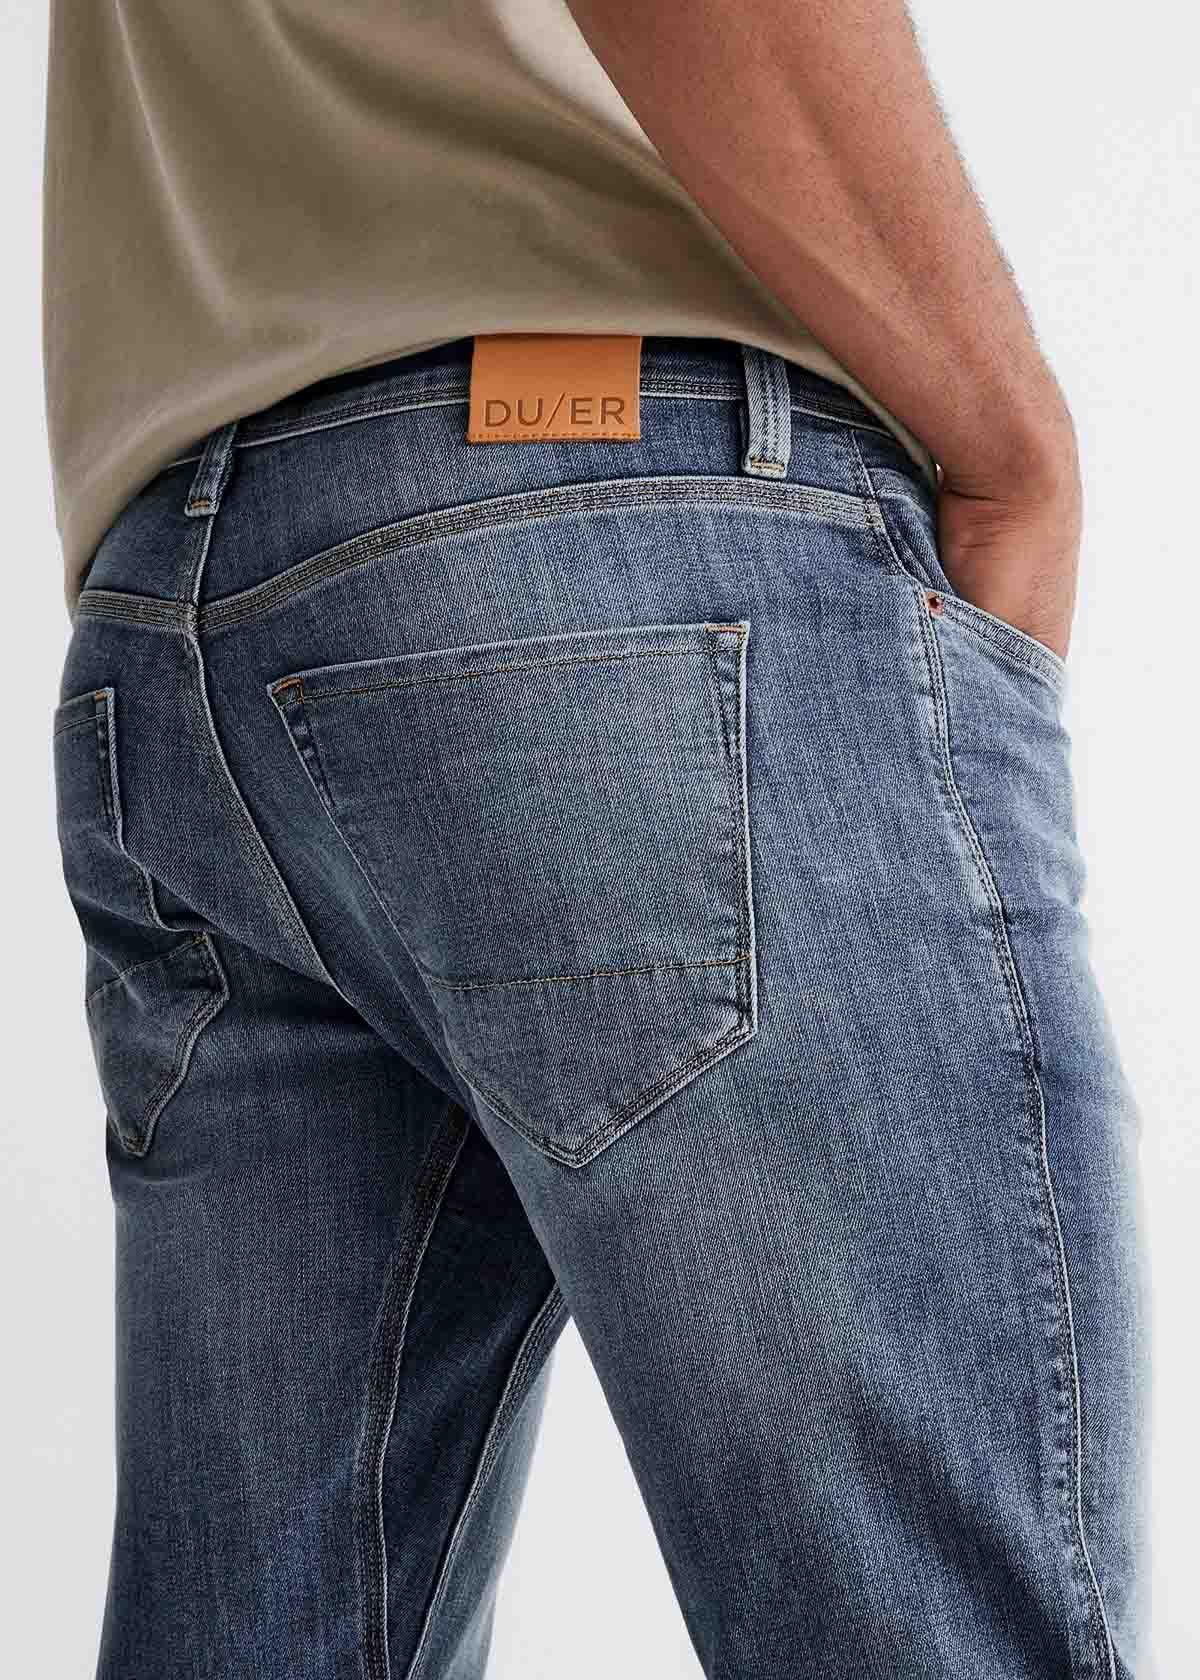 mens relaxed fit light blue stretch jeans back pocket and patch